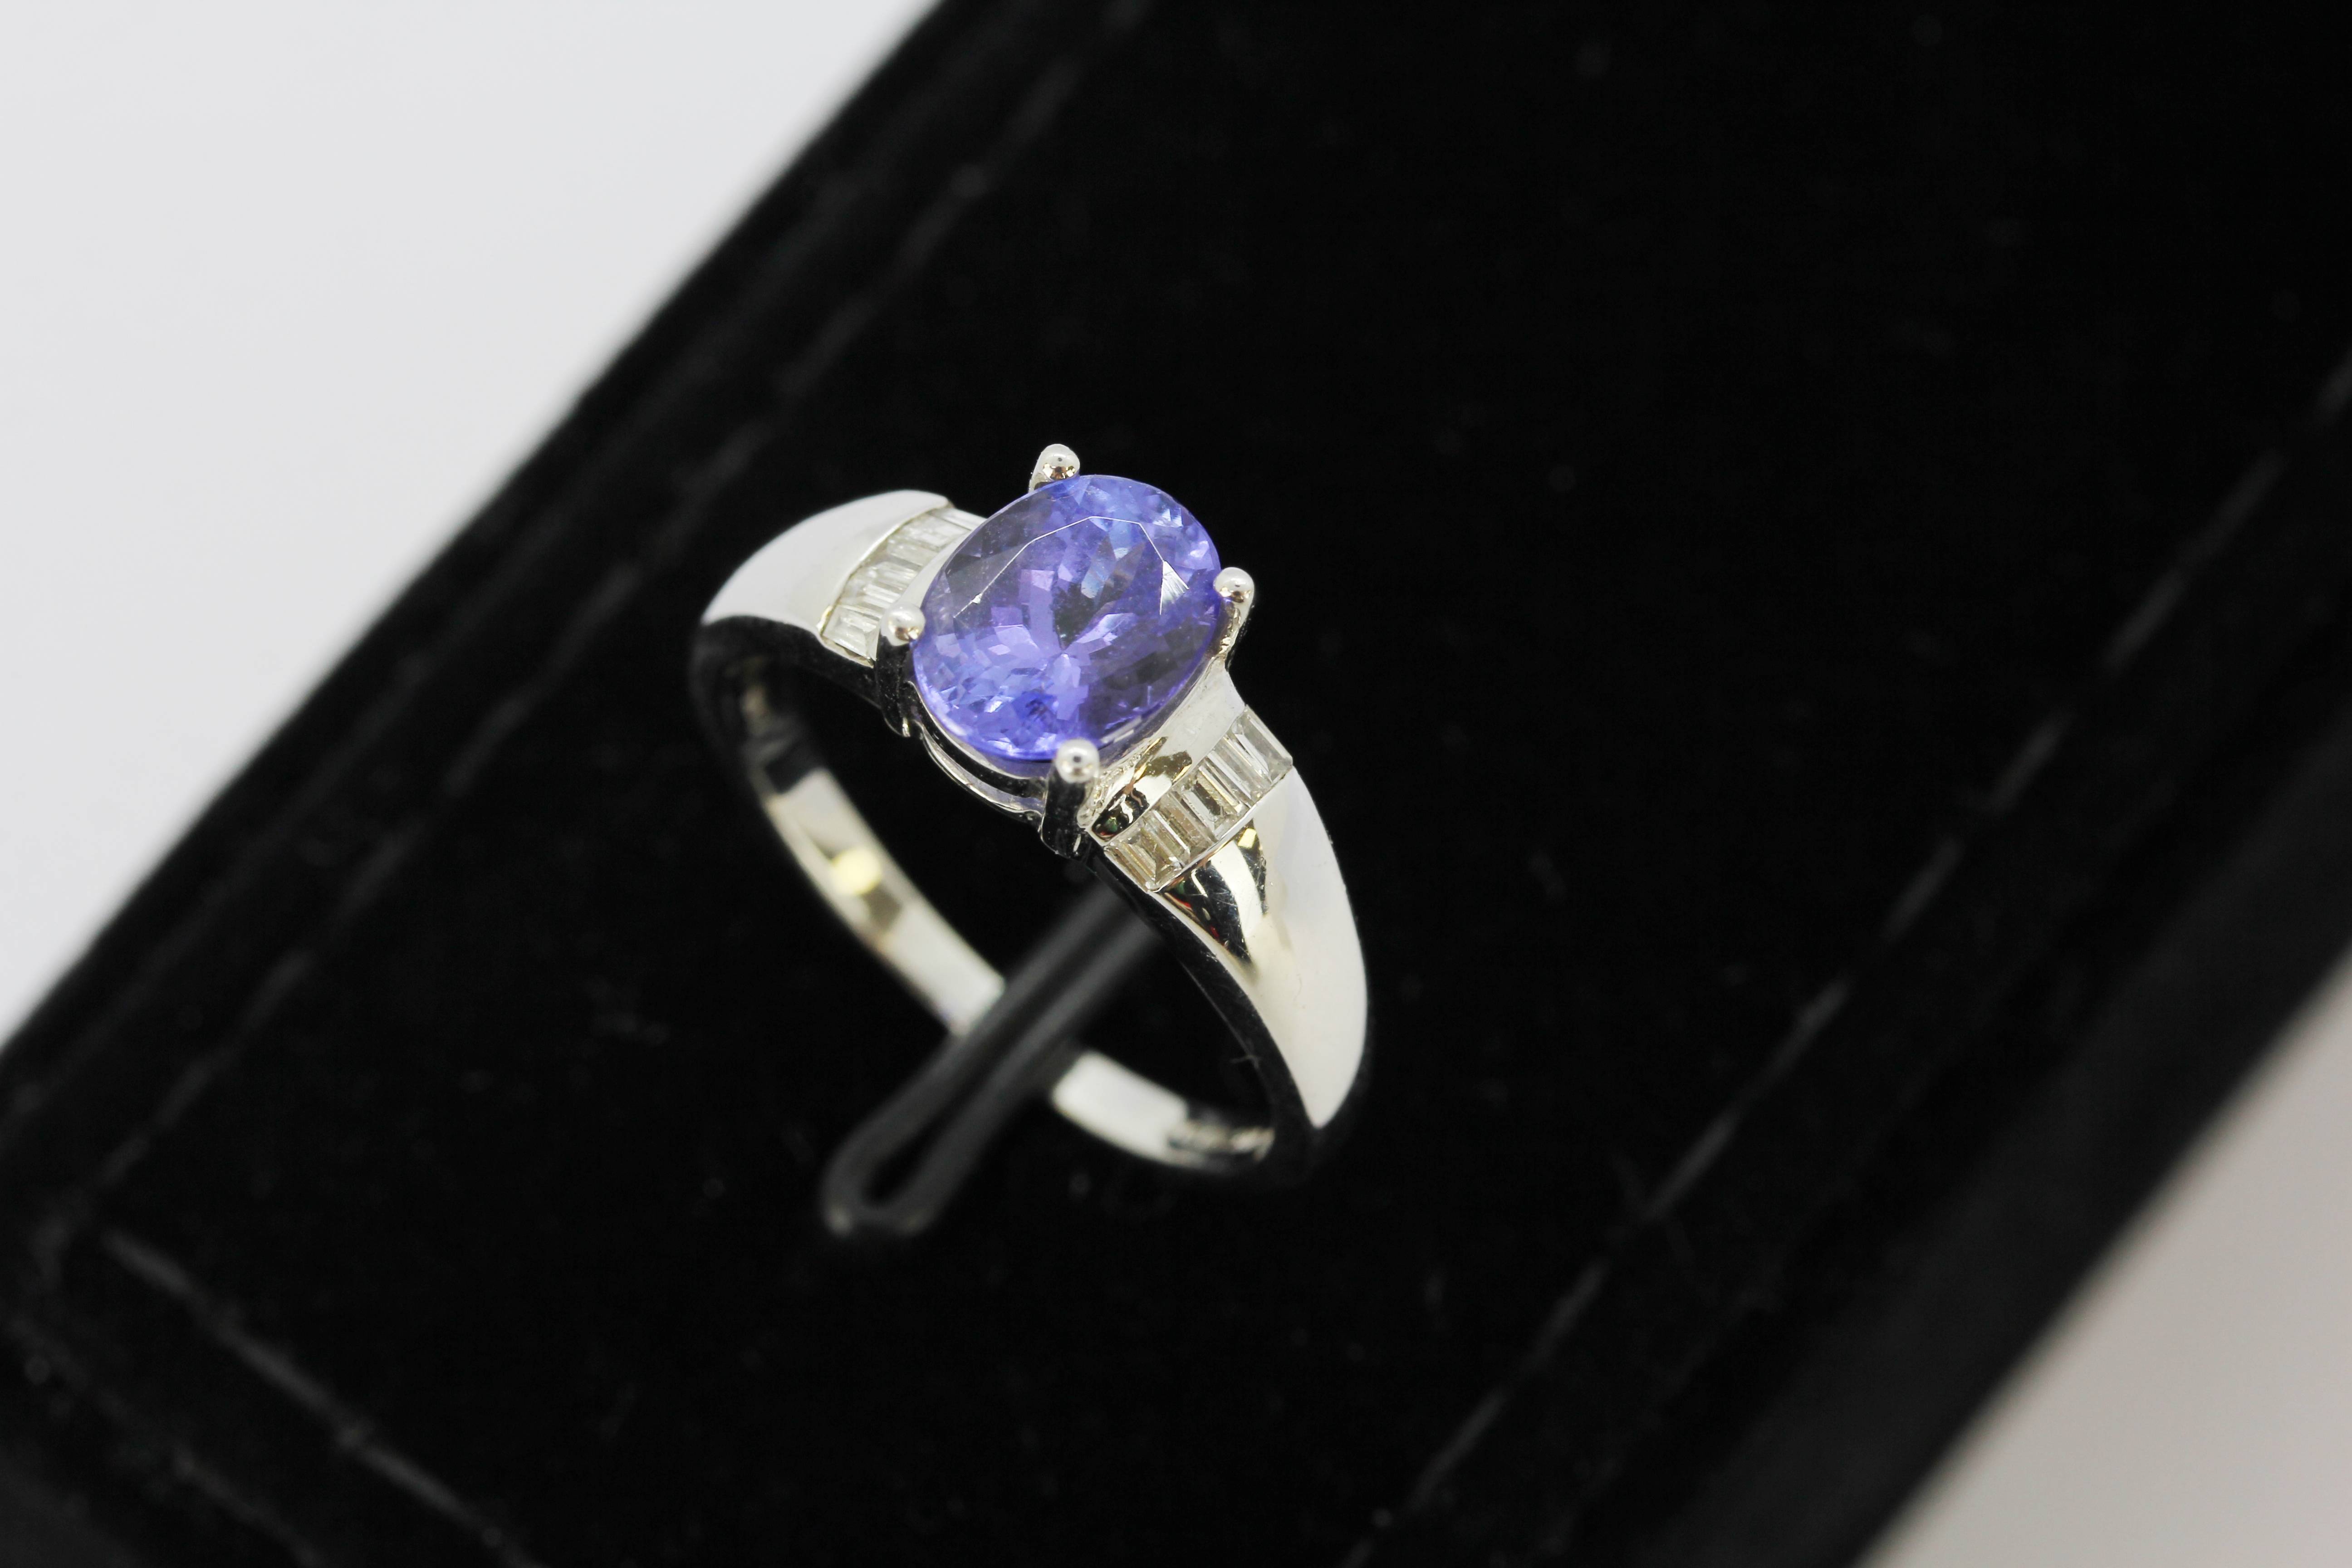 An 18ct white gold ring set with an oval cut tanzanite and diamond set shoulders, (M.5).